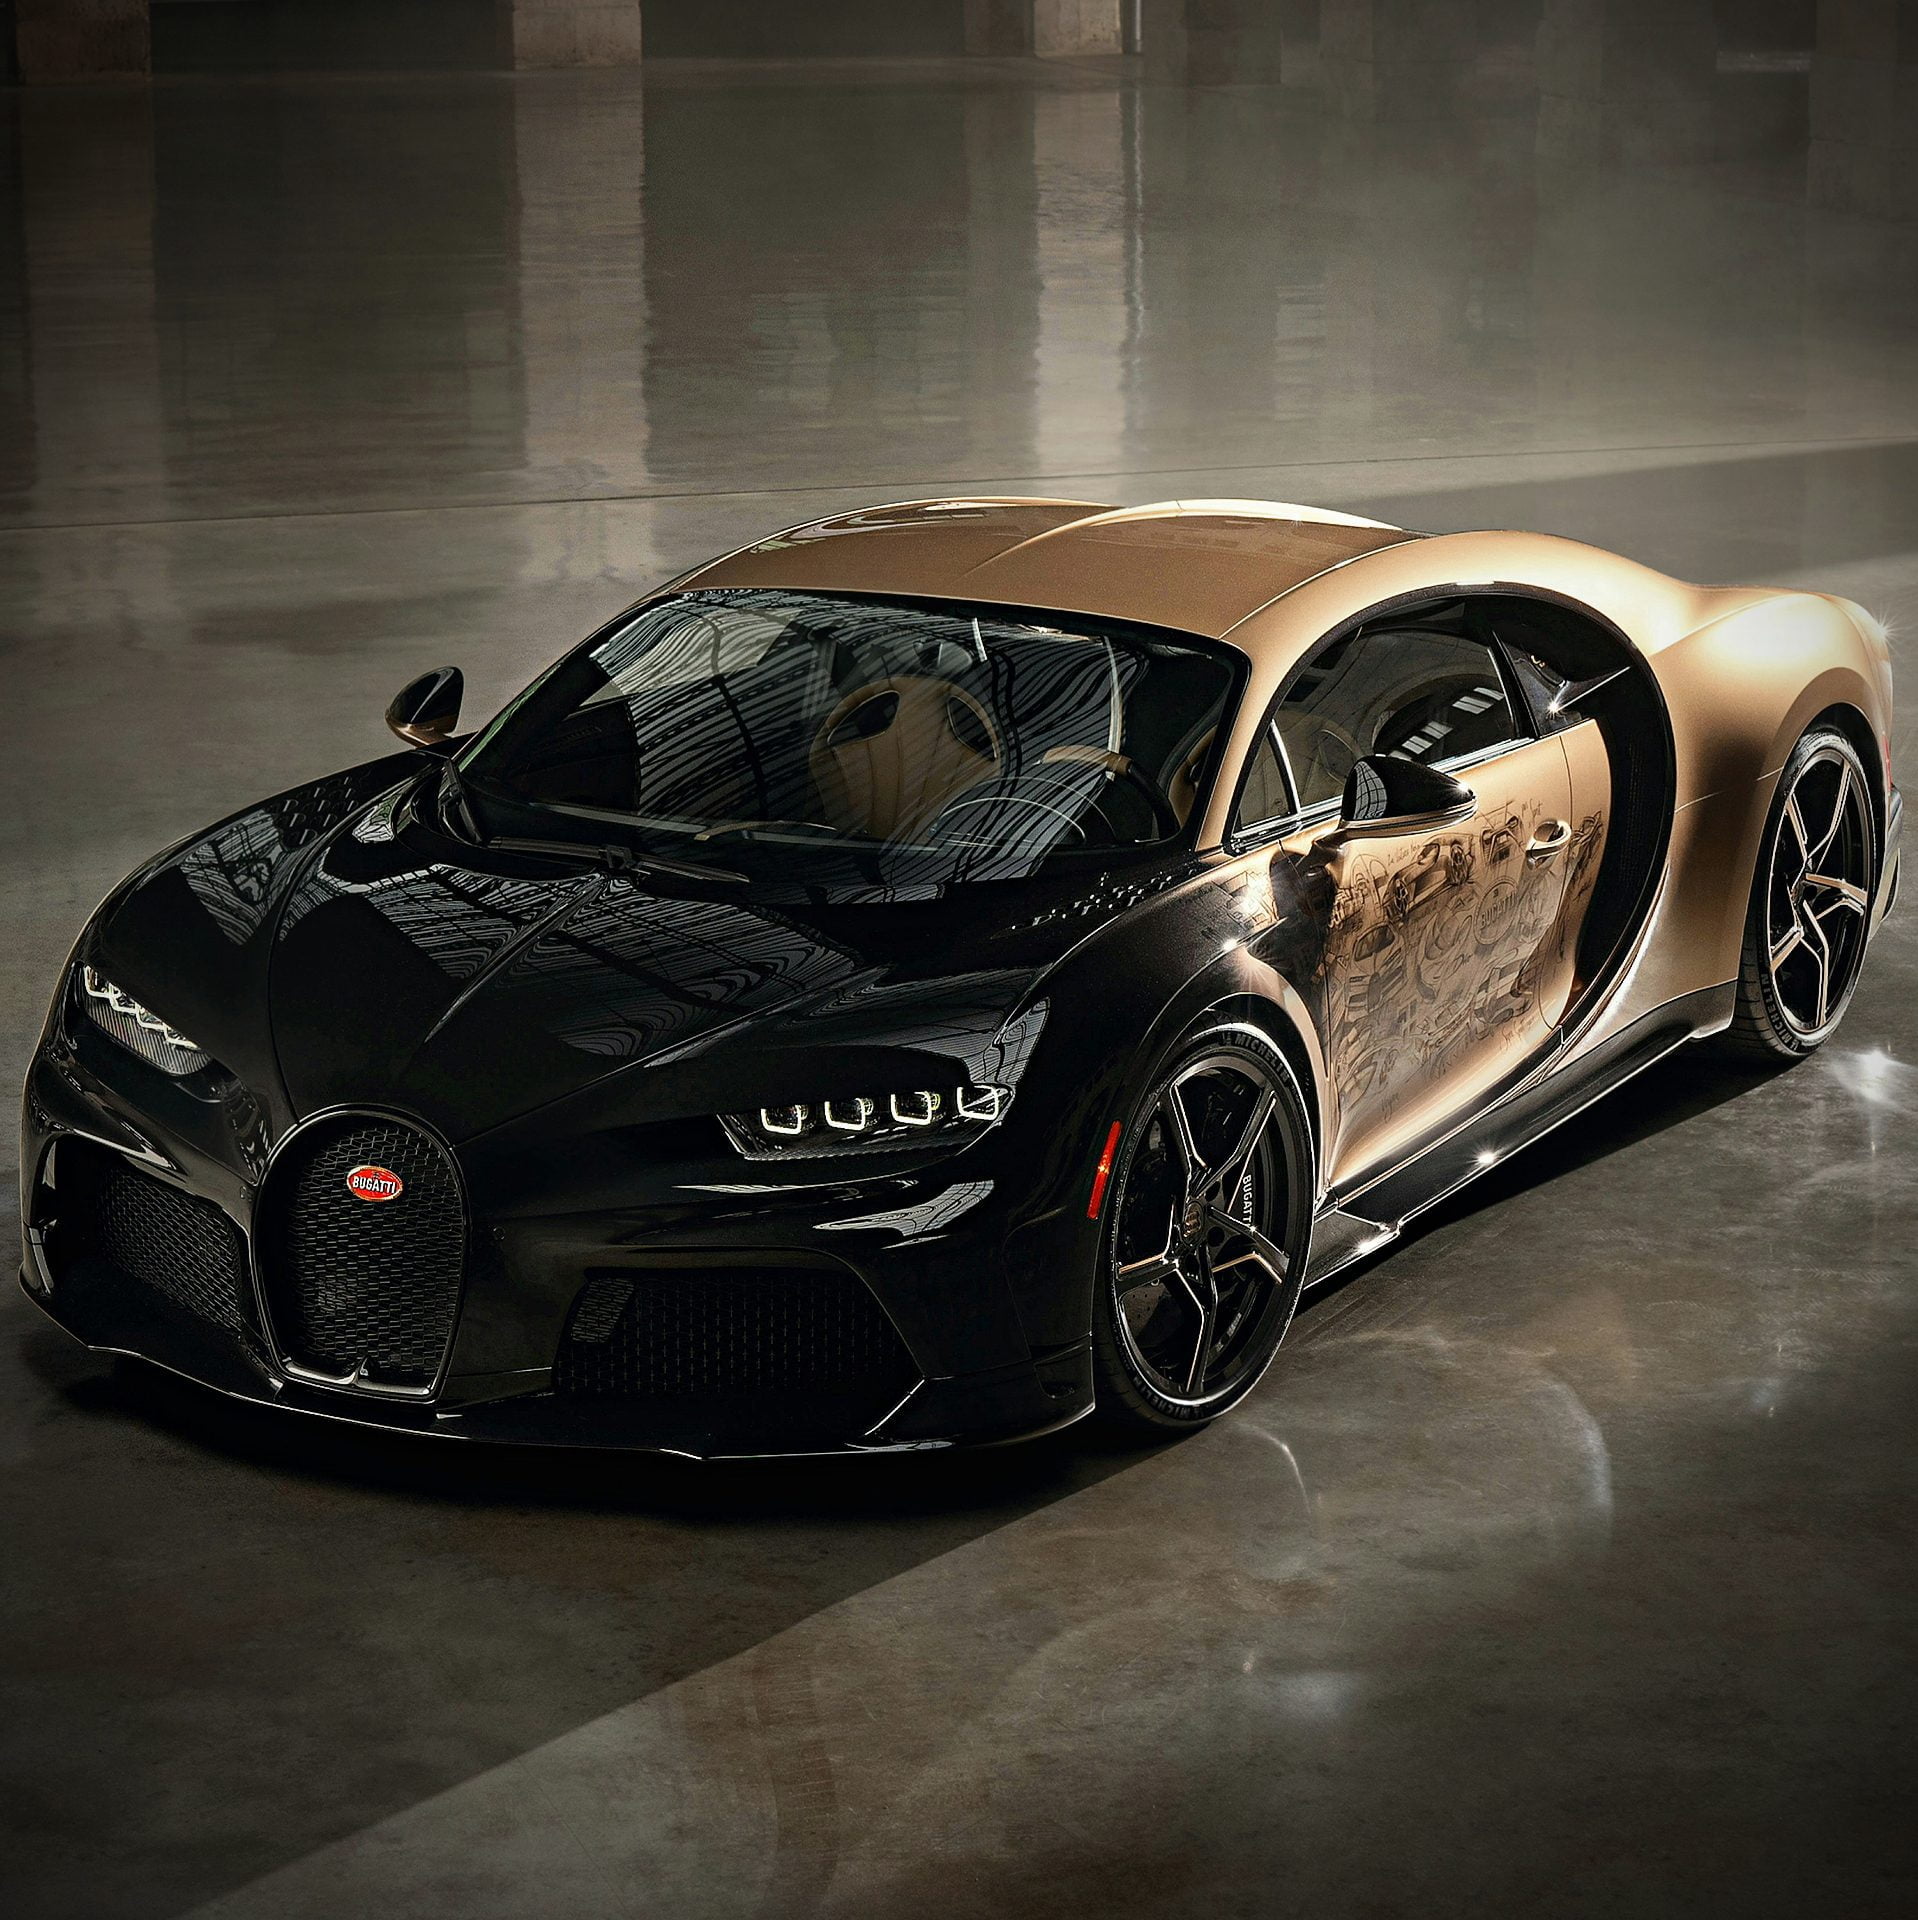 Bugatti debuted the one-of-one Chiron Super Sport “Golden Era,” which celebrates the incomparable legacy of the French marque via 360 MAGAZINE.